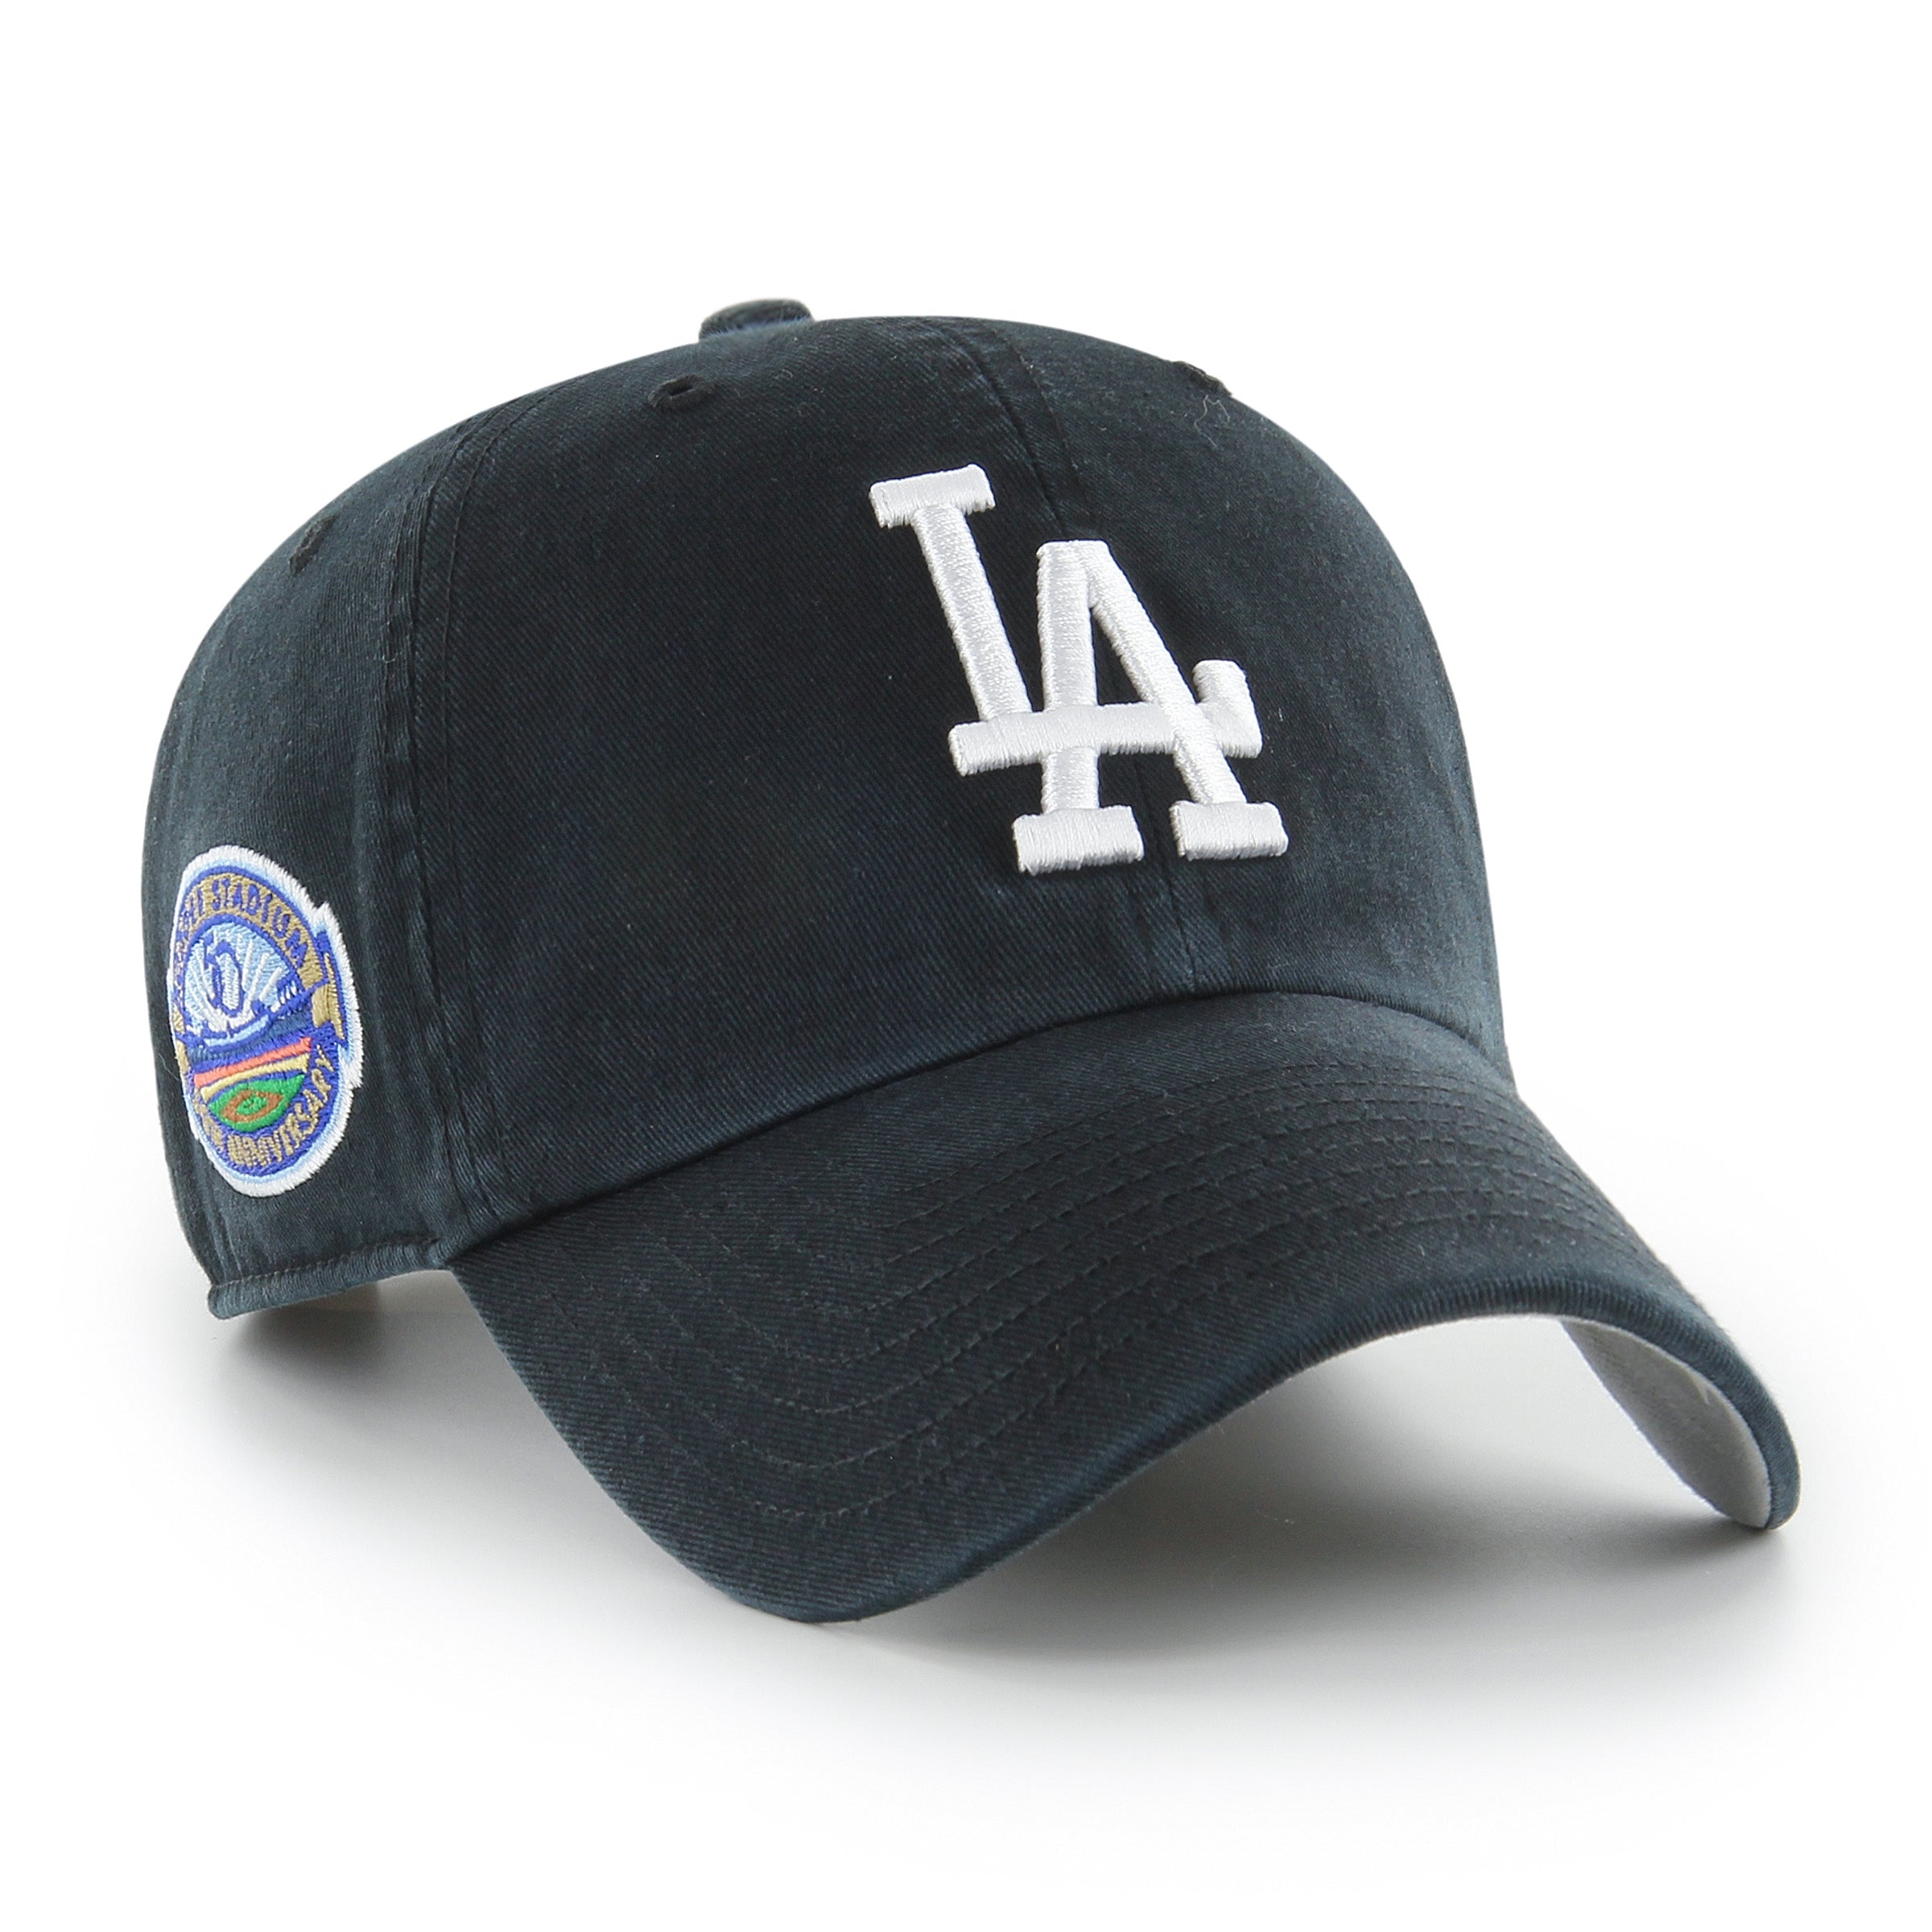 MLB LOS ANGELES DODGERS COOPERSTOWN DOUBLE UNDER 47 CLEAN UP BLACK